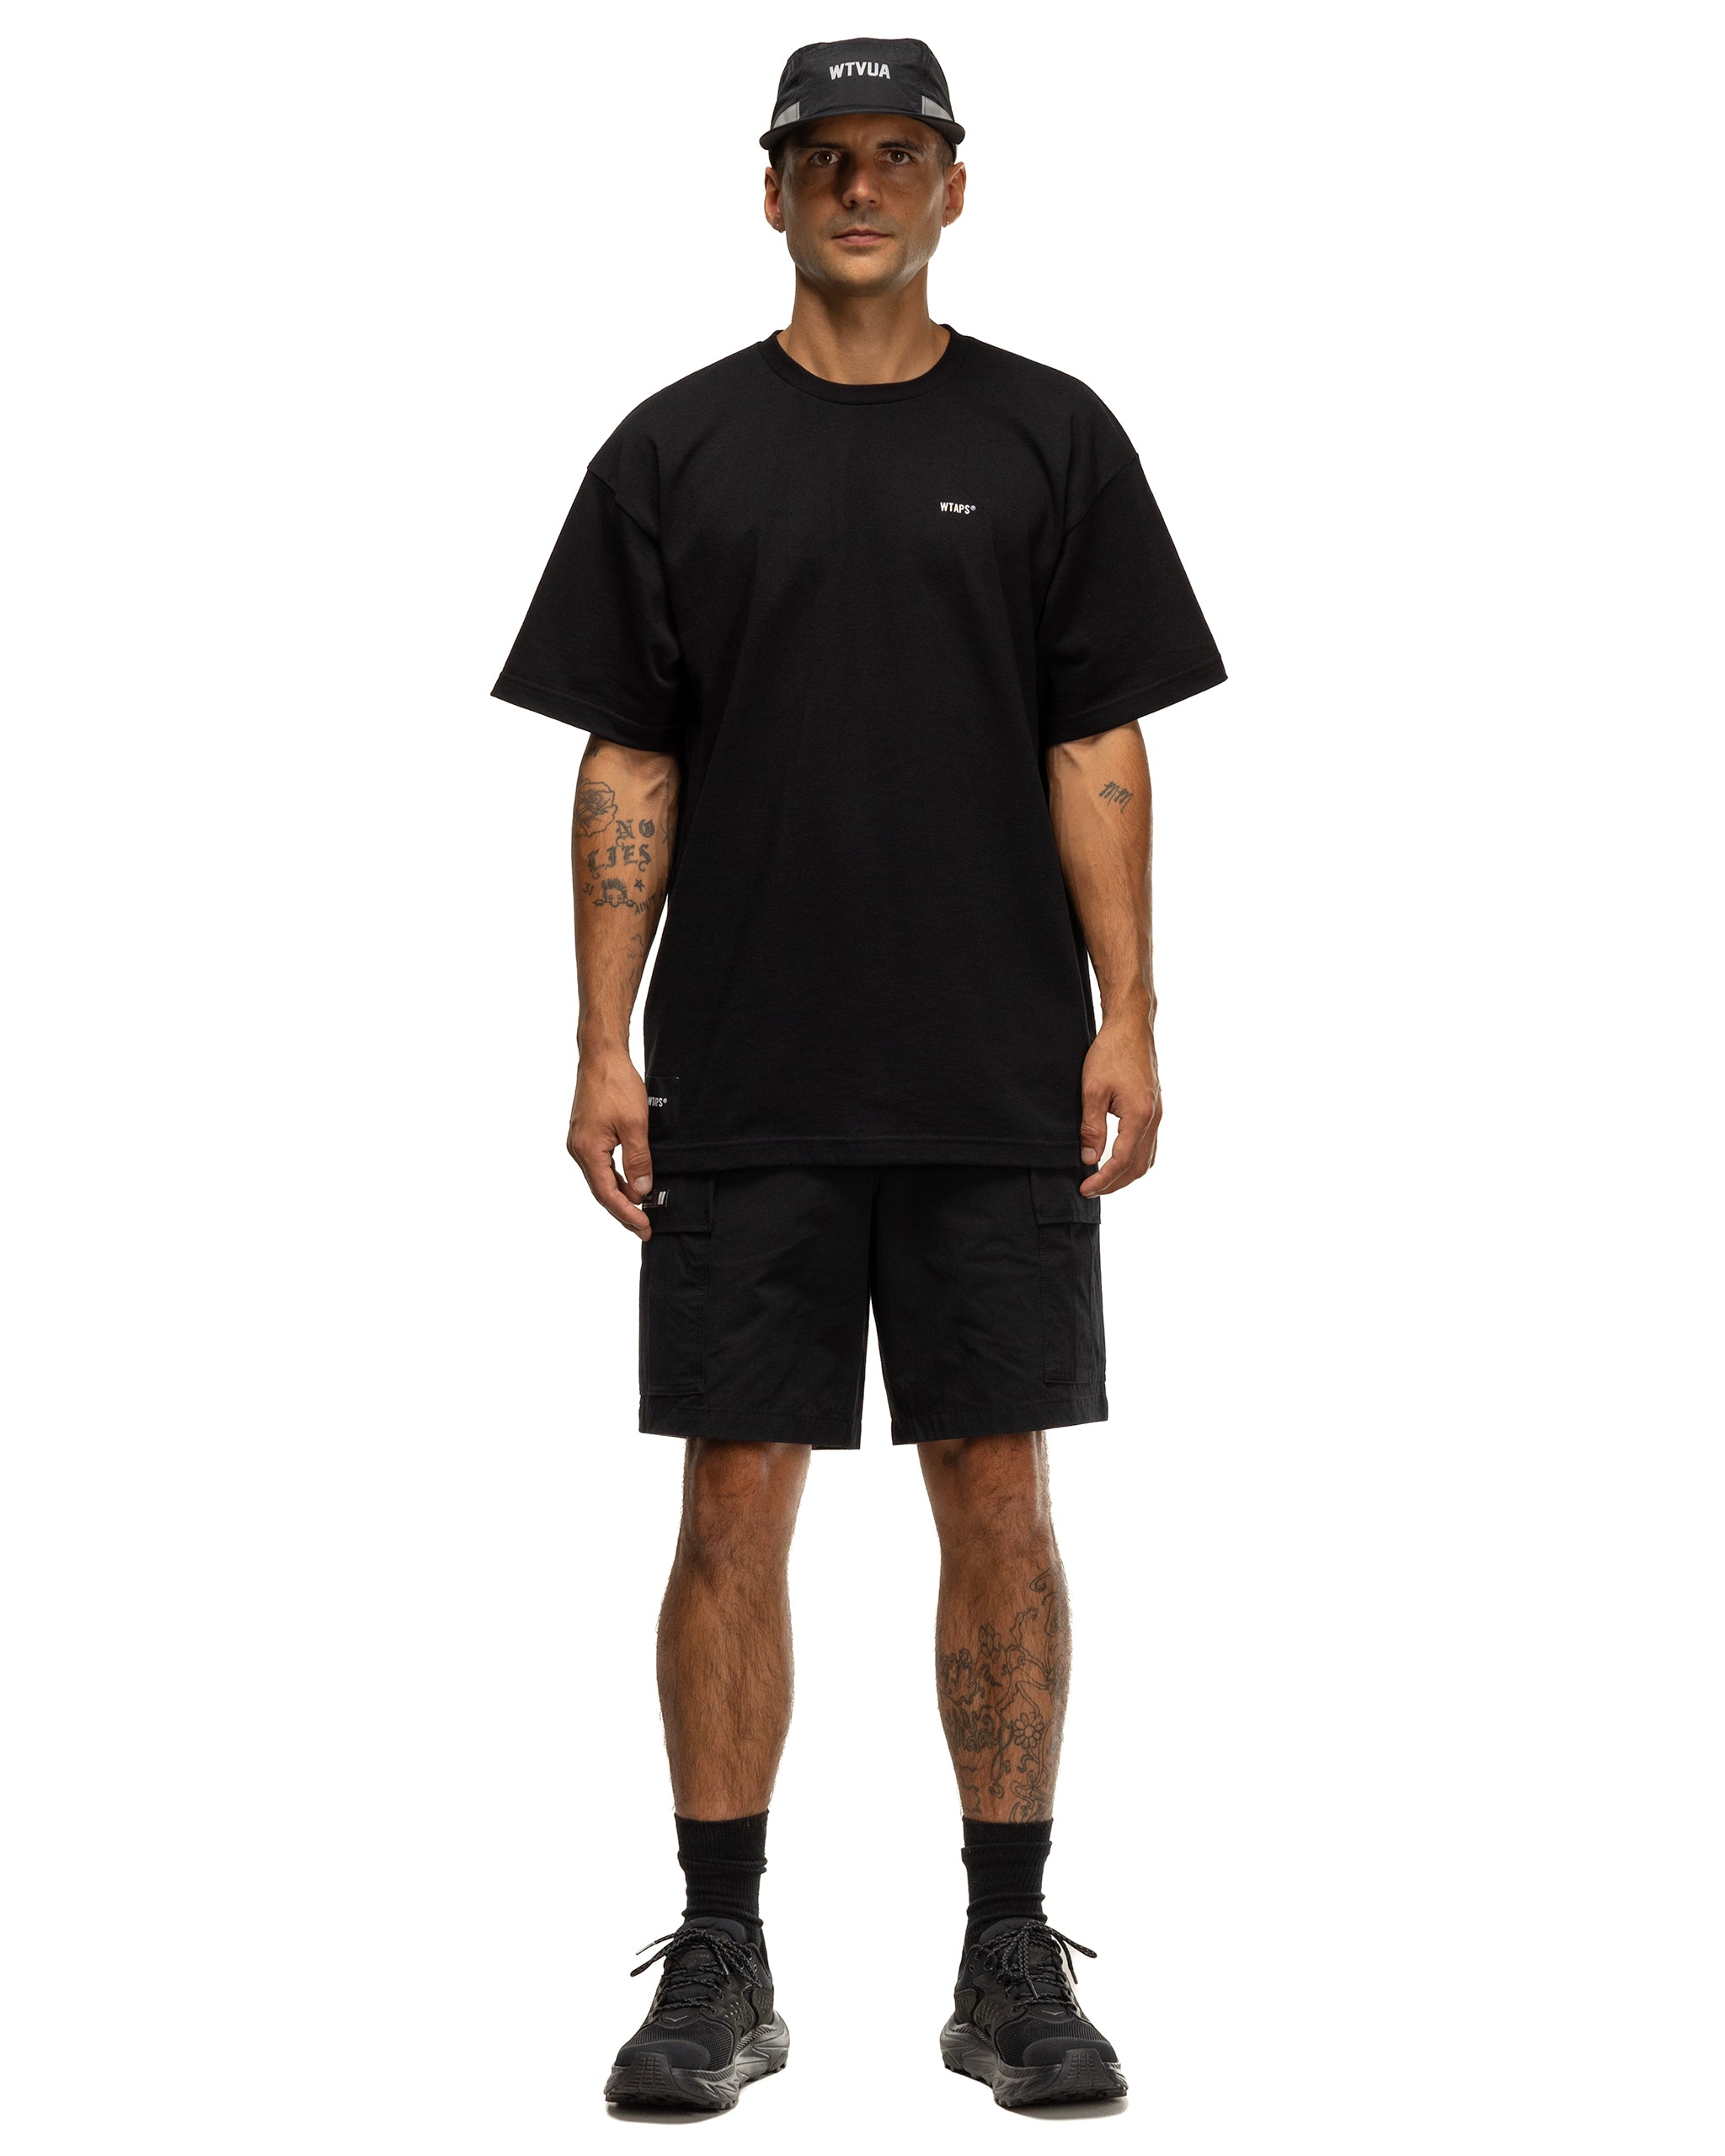 MILS   Shorts / Nyco. Oxford Black   HAVEN